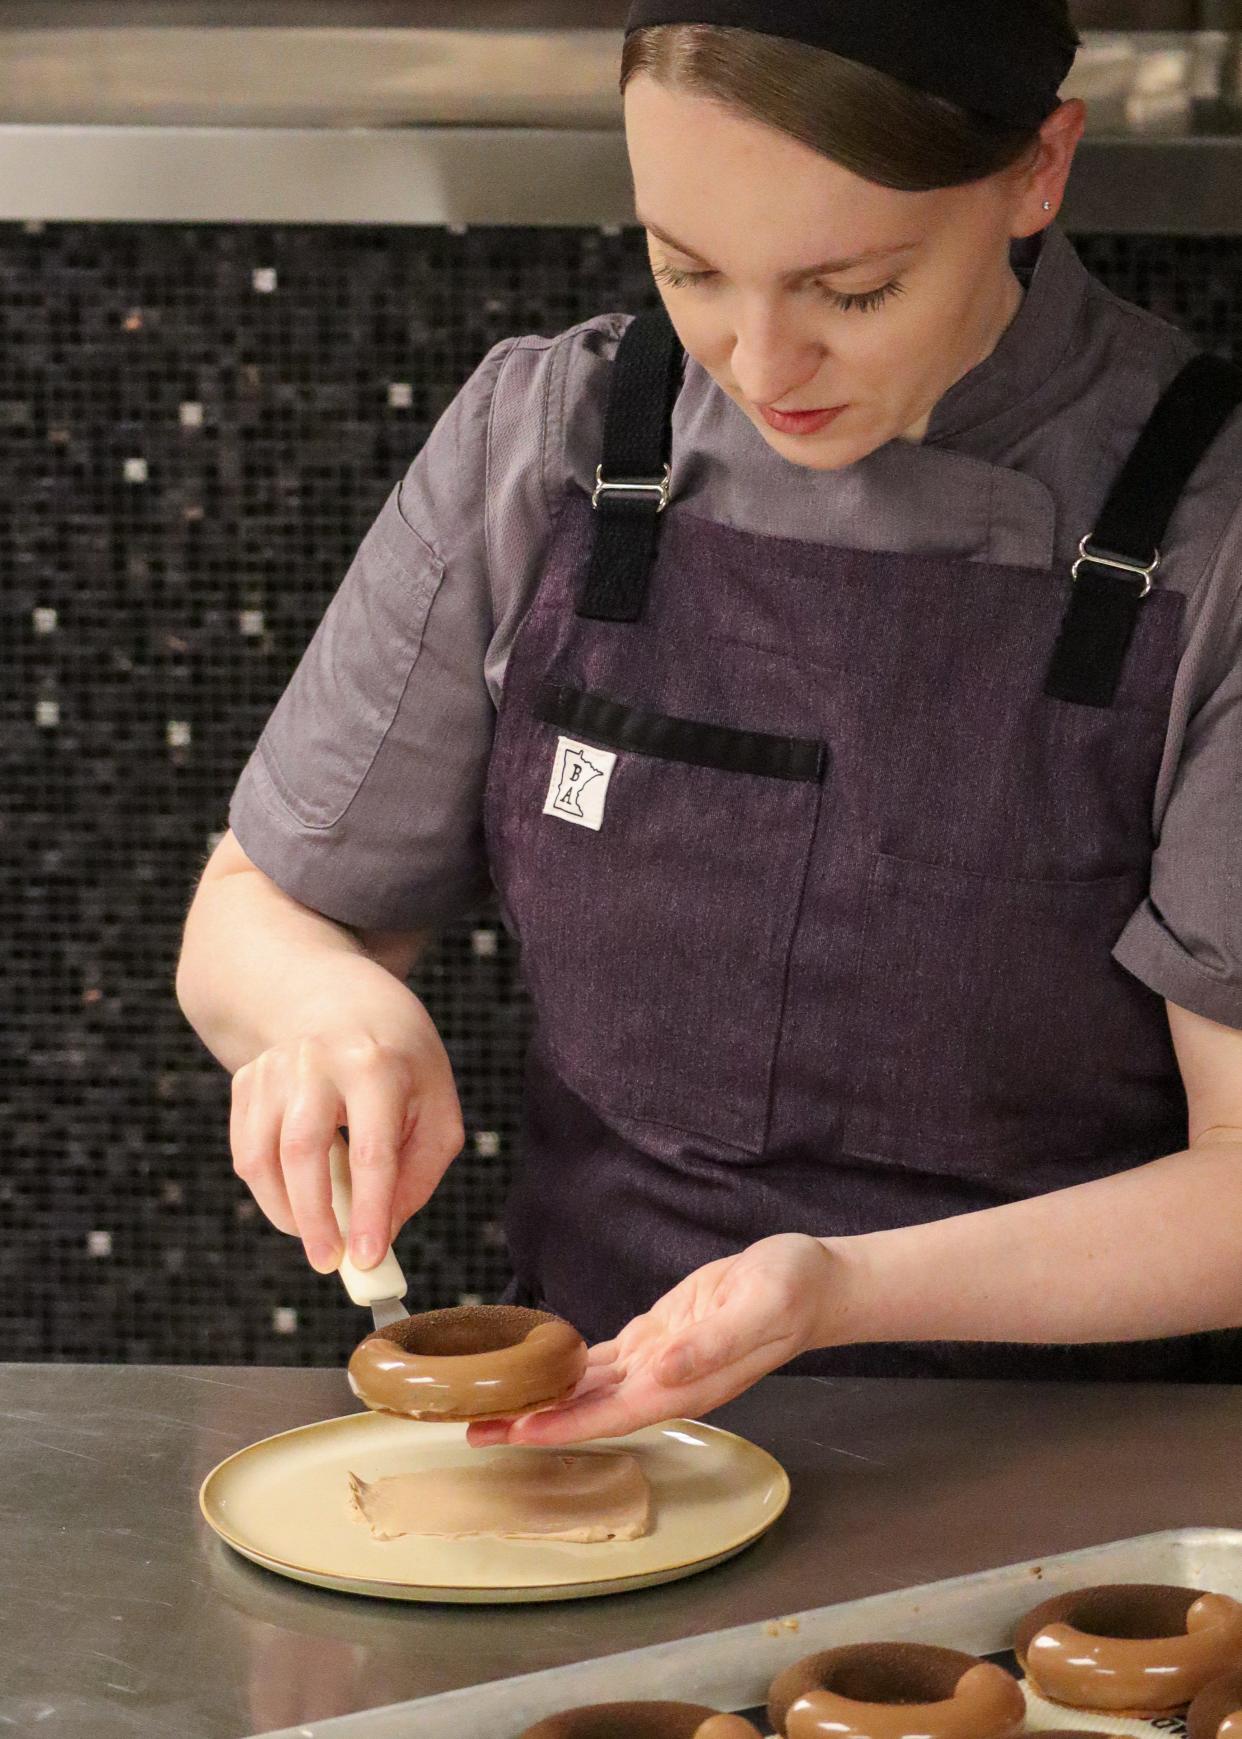 Executive pastry chef Noelle Marchetti plates the Nocciola dessert at Yolan at The Joseph, a Luxury Collection Hotel, in Nashville.